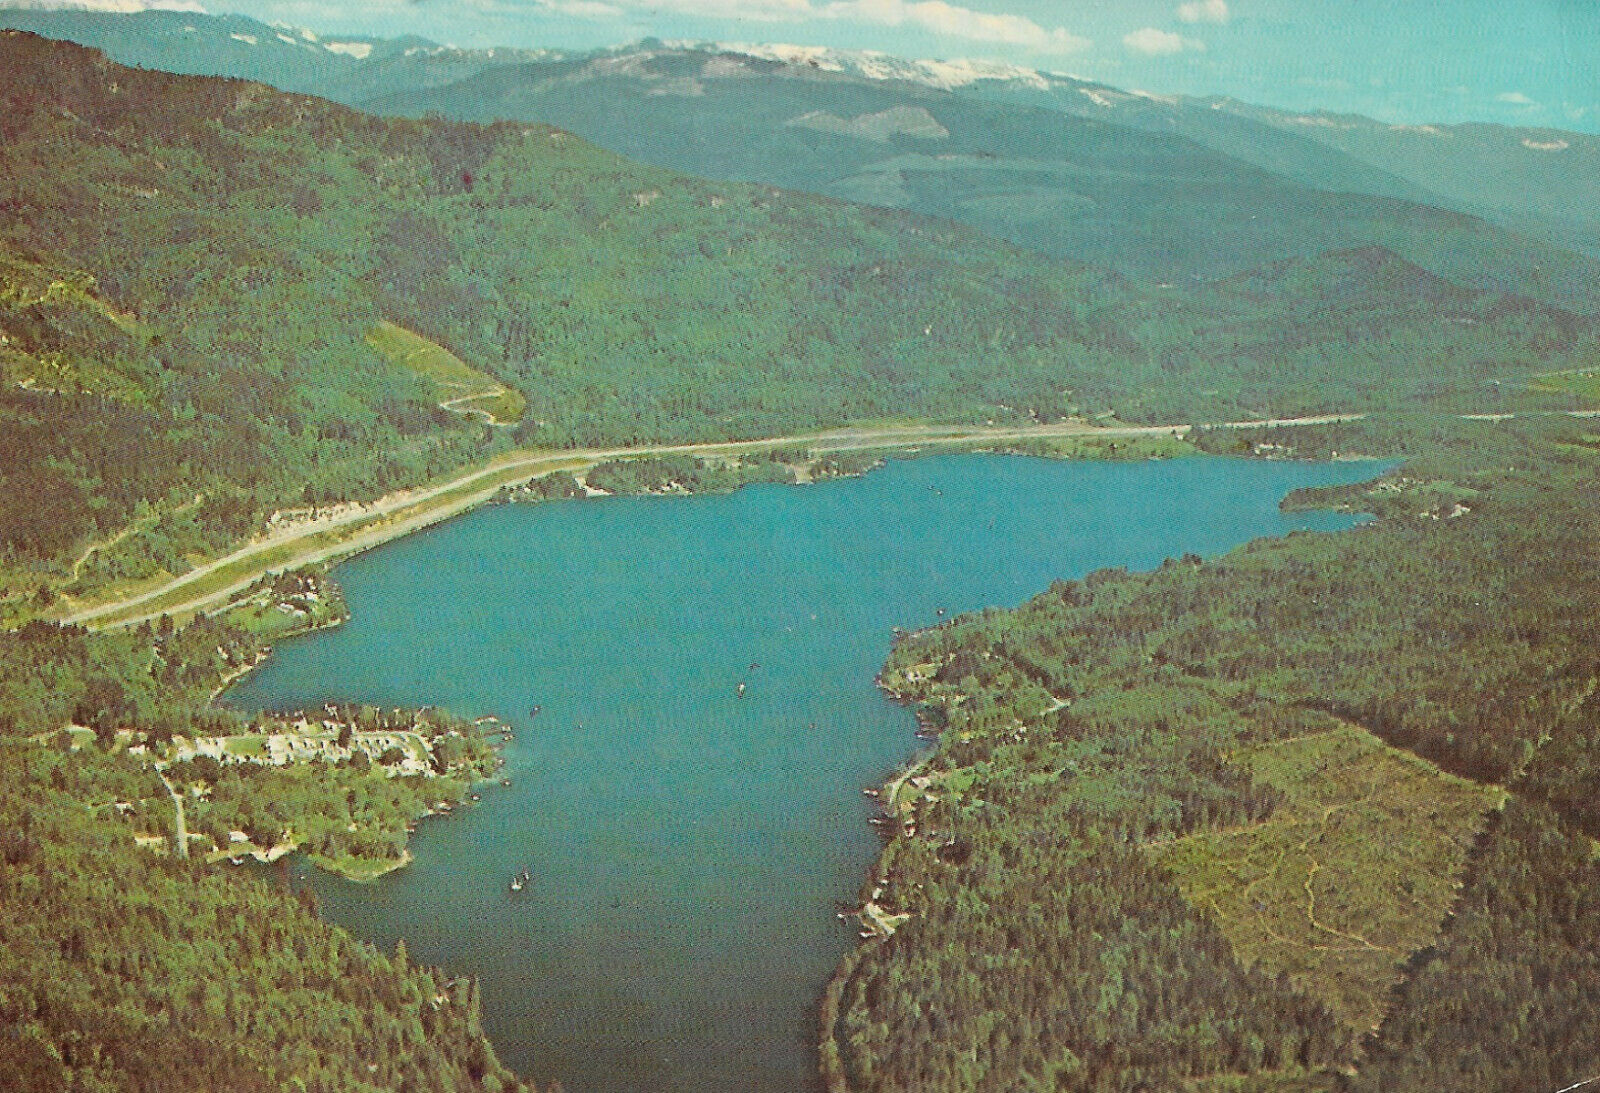 USA-Bellingham-Aerial view of Lake Samish with Interstate Hwy. 5 - 1977